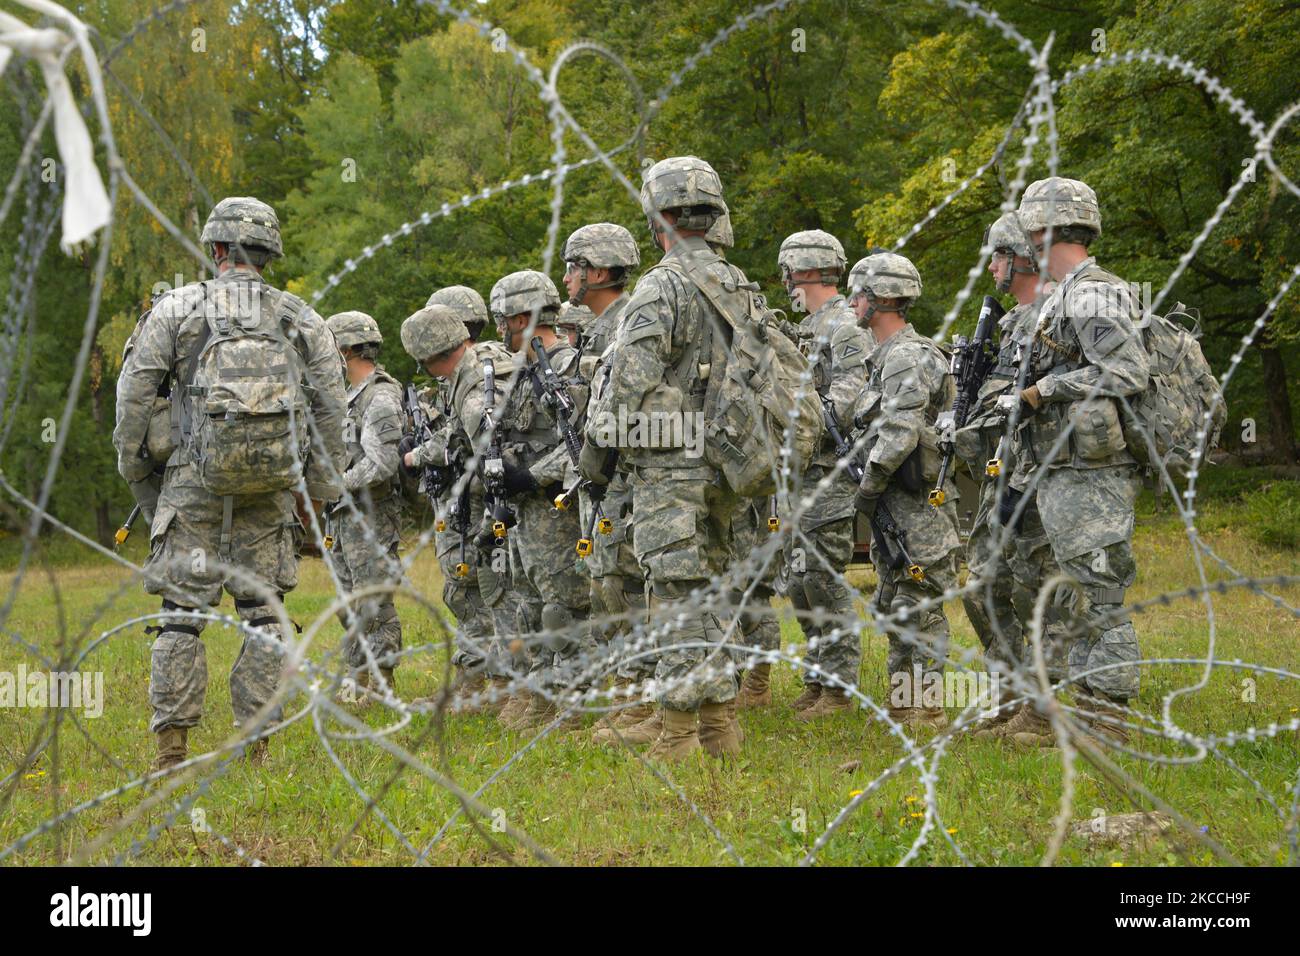 U.S. Army candidates wait at a holding area. Stock Photo